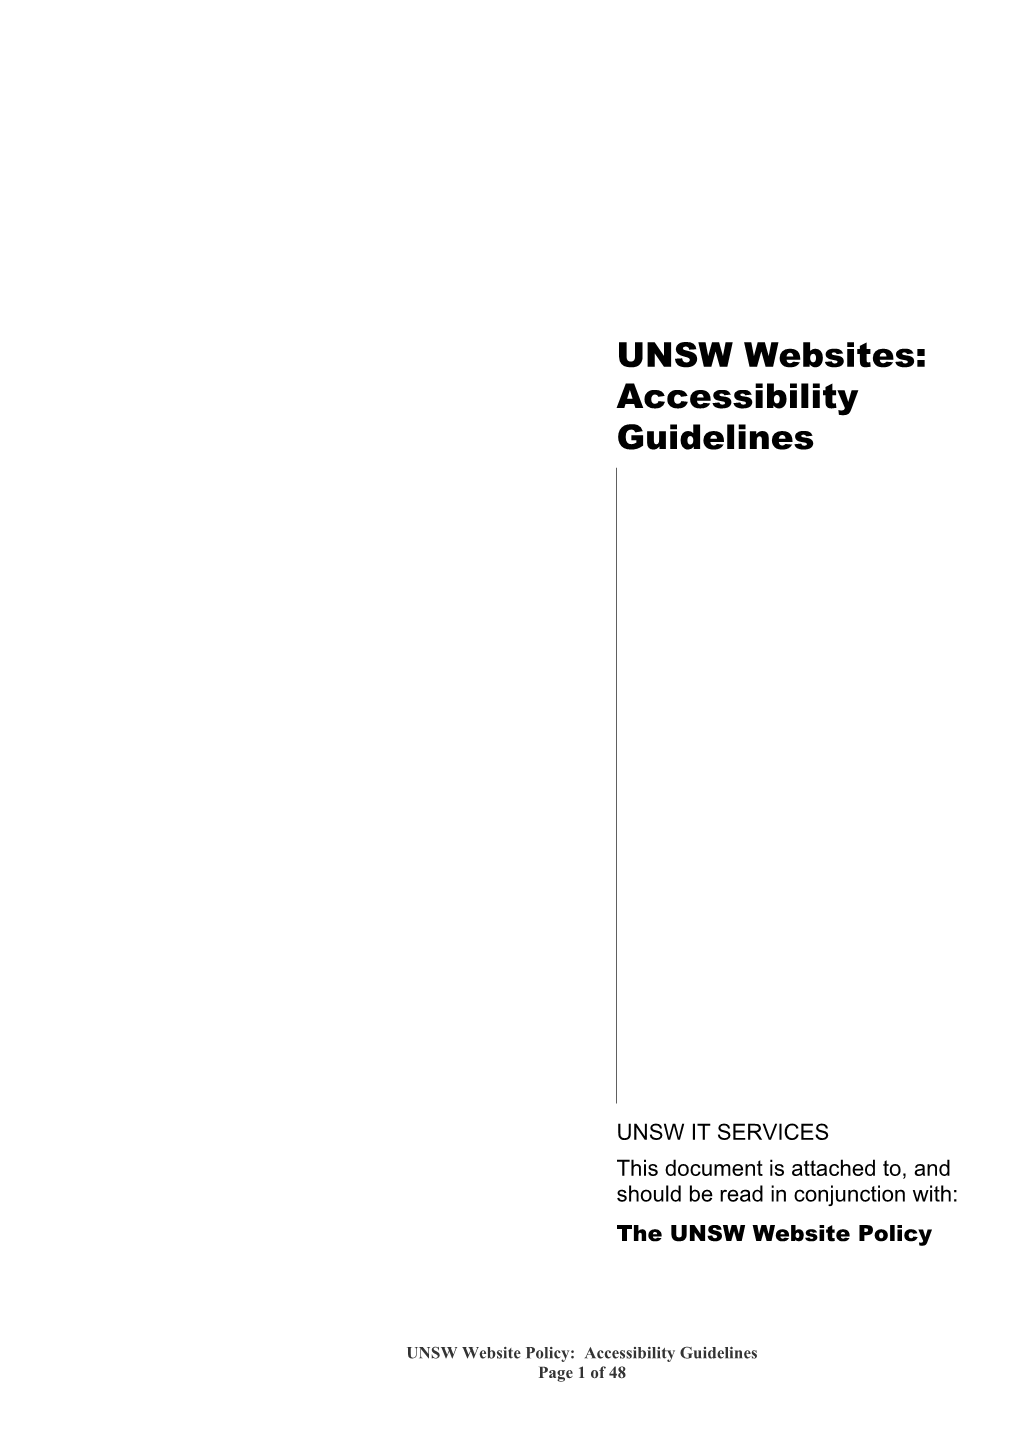 UNSW Websites: Accessibility Guidelines